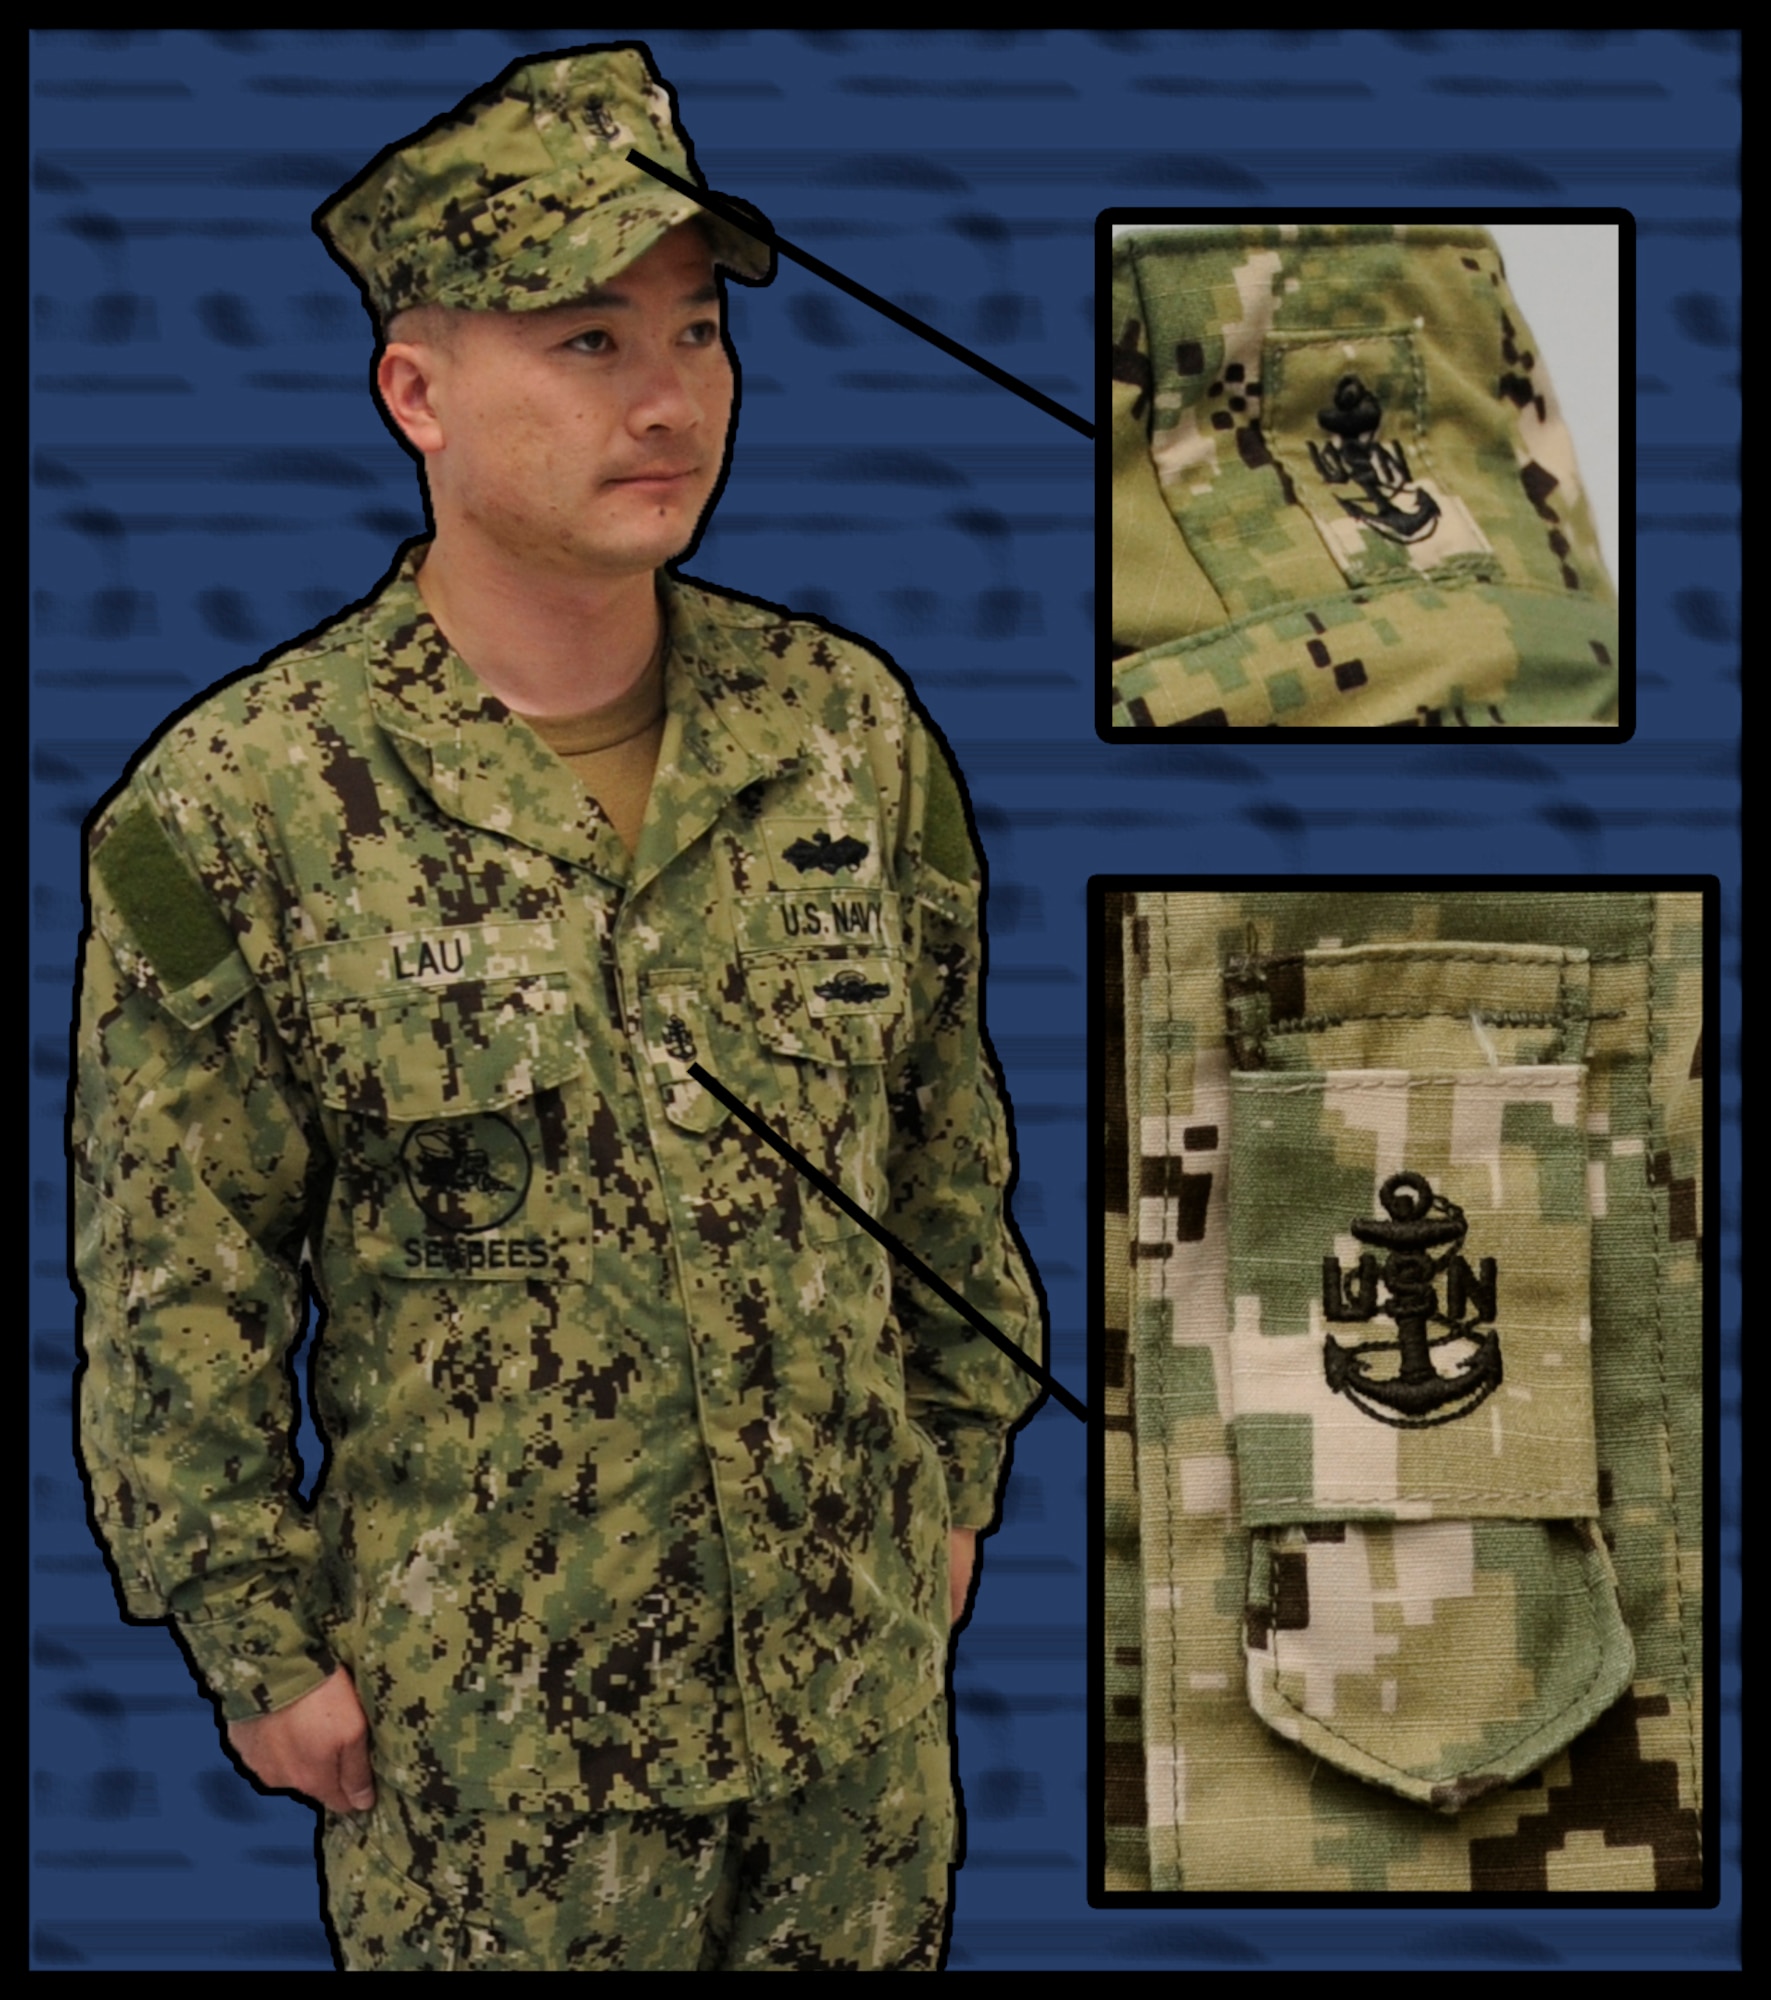 U.S. Navy Chief Engineering Aid Alwin Lau, Naval Air Facility Misawa public works engineering aid, displays a Navy Working Uniform Type 3 at Misawa Air Base, Japan, June 28, 2012. Navy personnel commonly wear this uniform in certain deployed environments. The insignia for this uniform are located on the front of the cap and the center of the chest. (U.S. Air Force graphic by Airman 1st Class Kaleb Snay/ Released)